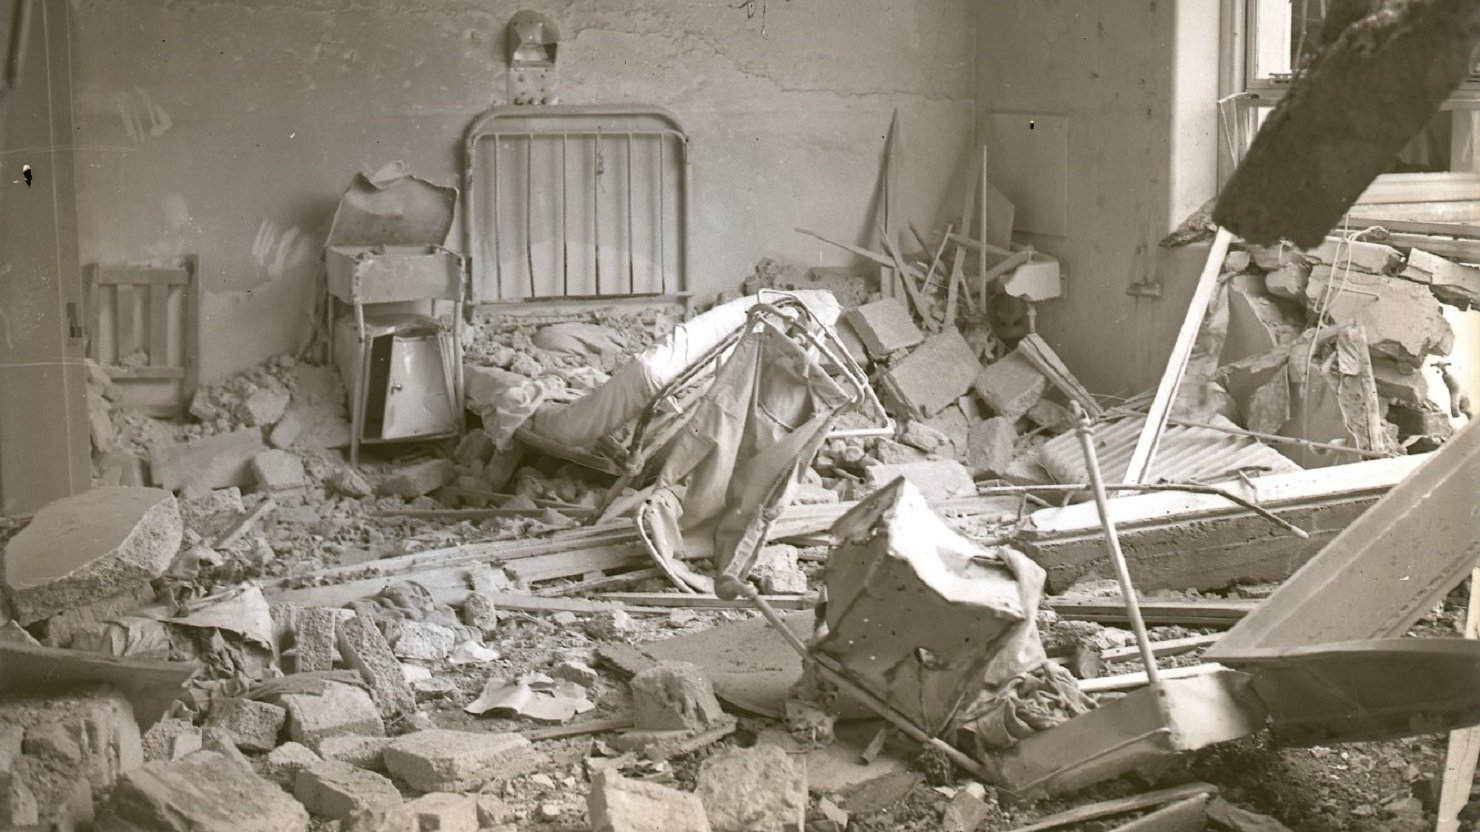 Freedom Fields hospital maternity unit after being bombed